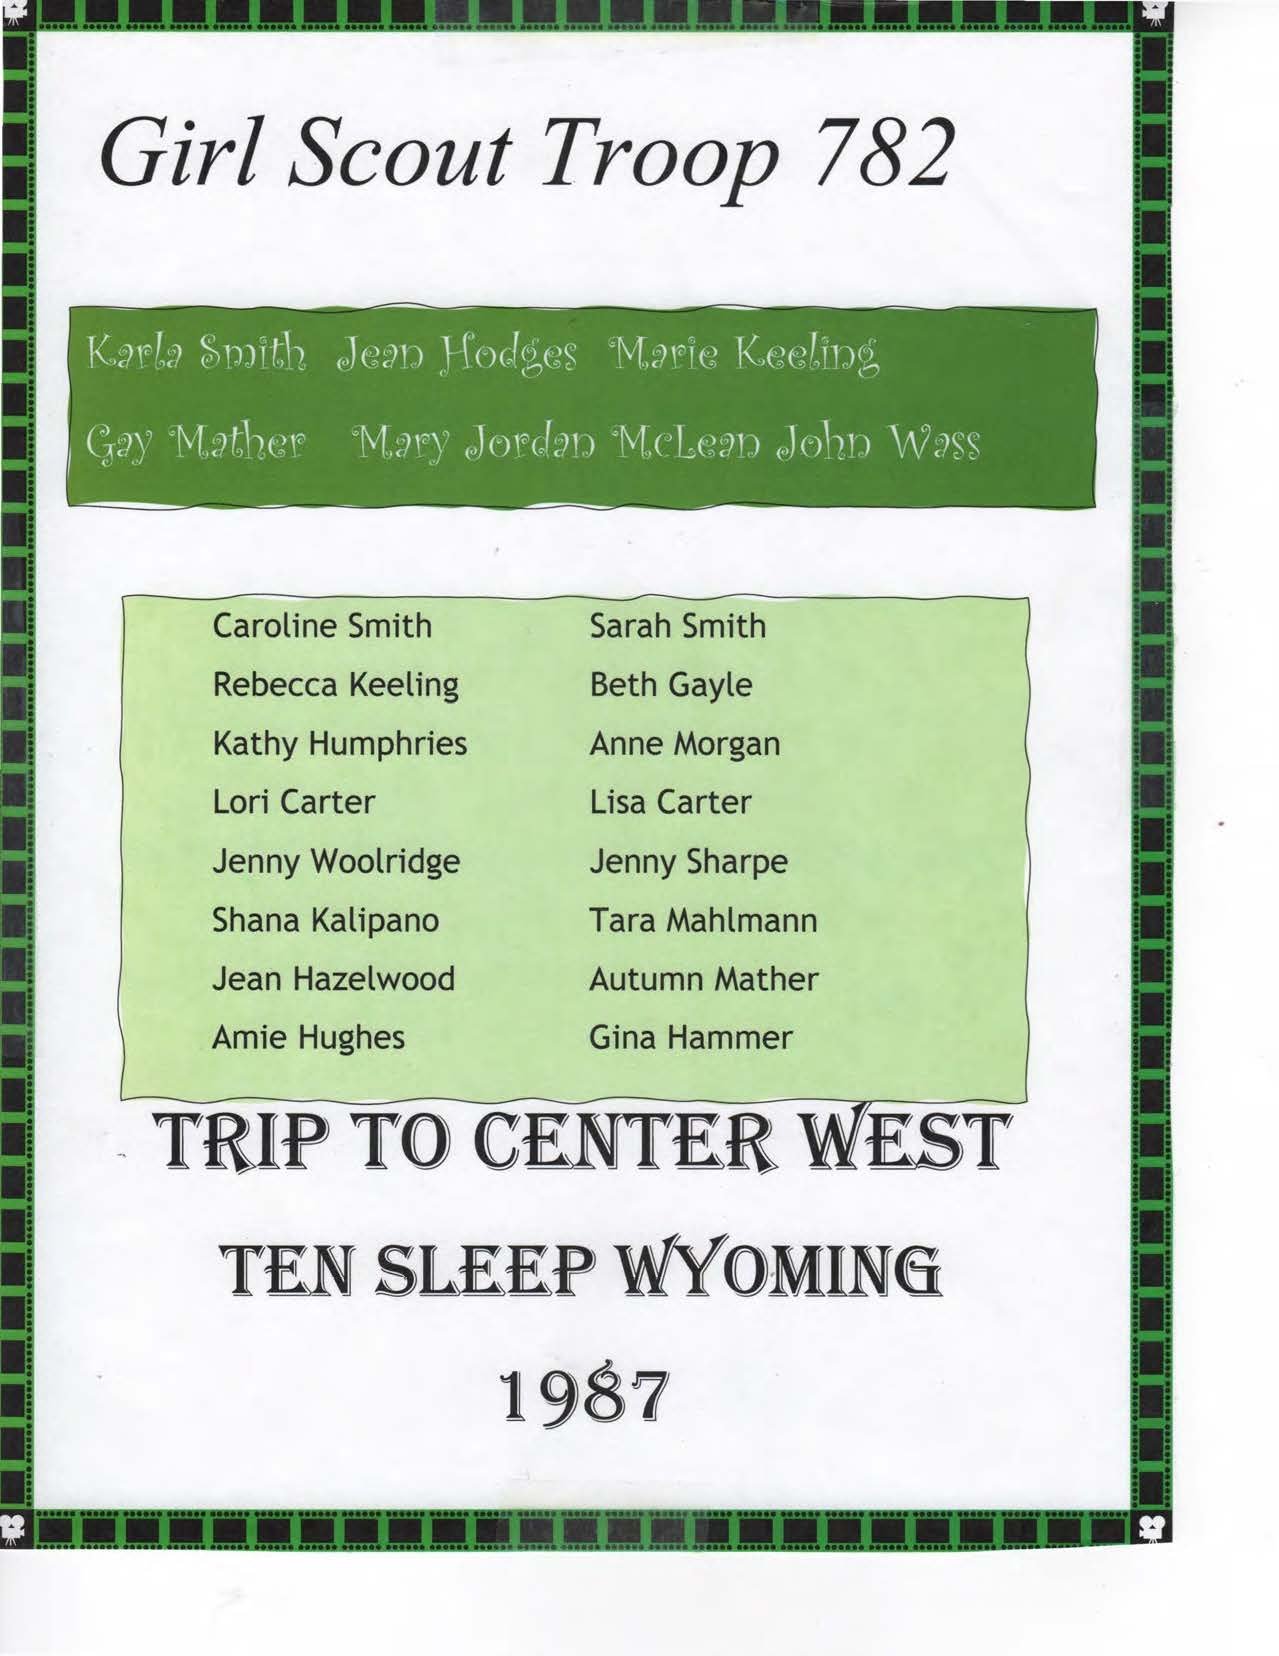 Girls Scouts-Troop 782 trip to Center West 1987 - Archive pdf_Page_01.jpg